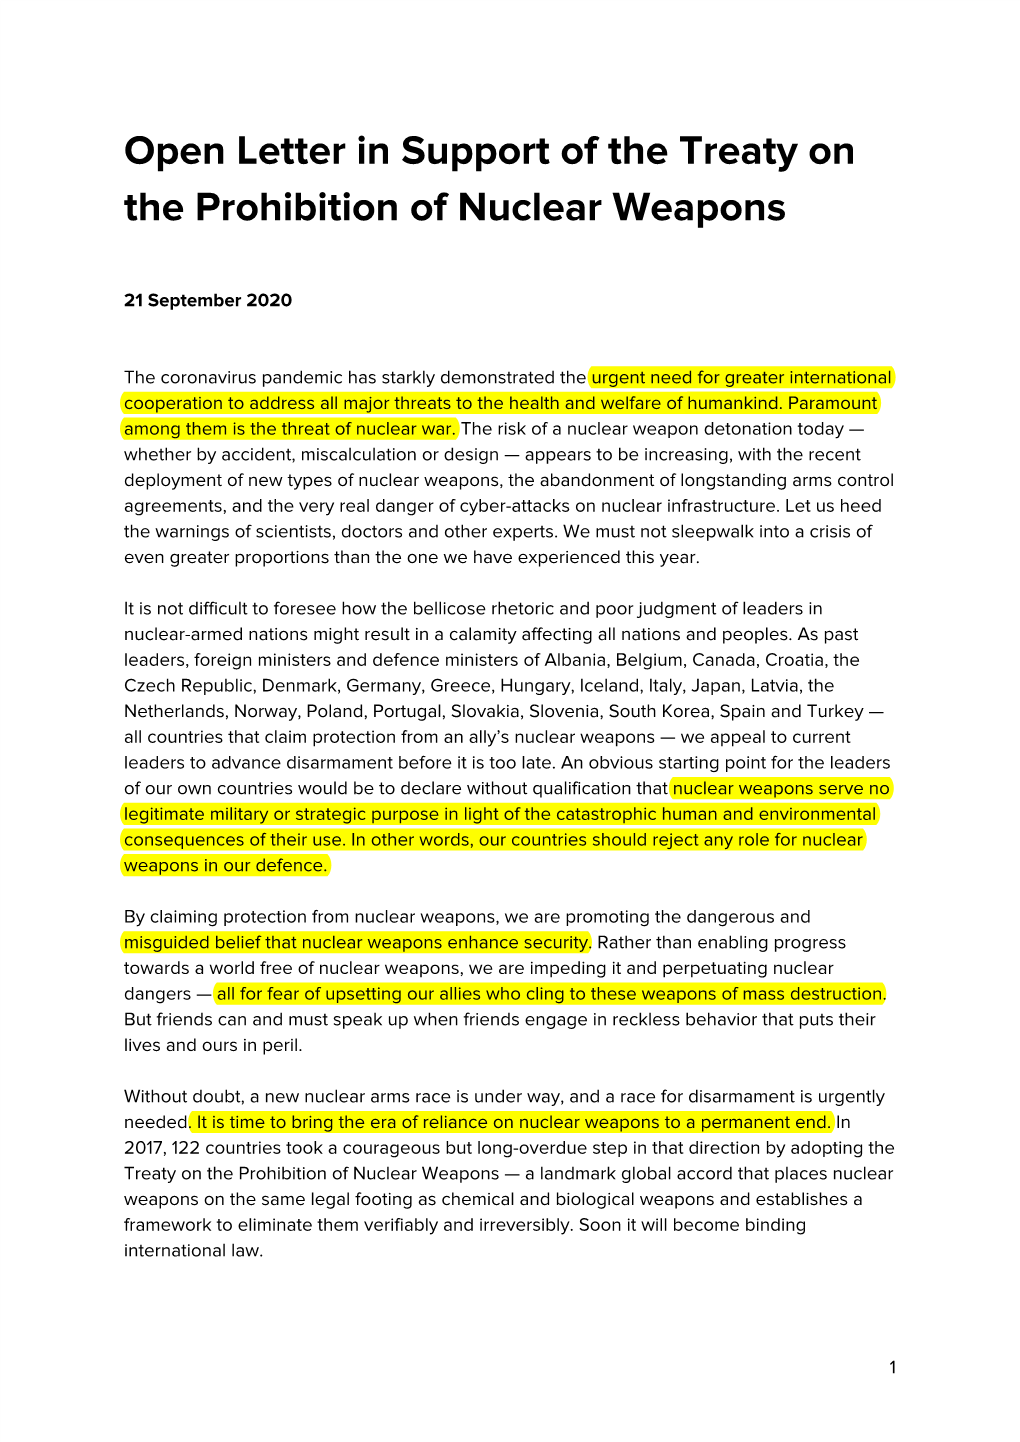 Open Letter in Support of the Treaty on the Prohibition of Nuclear Weapons